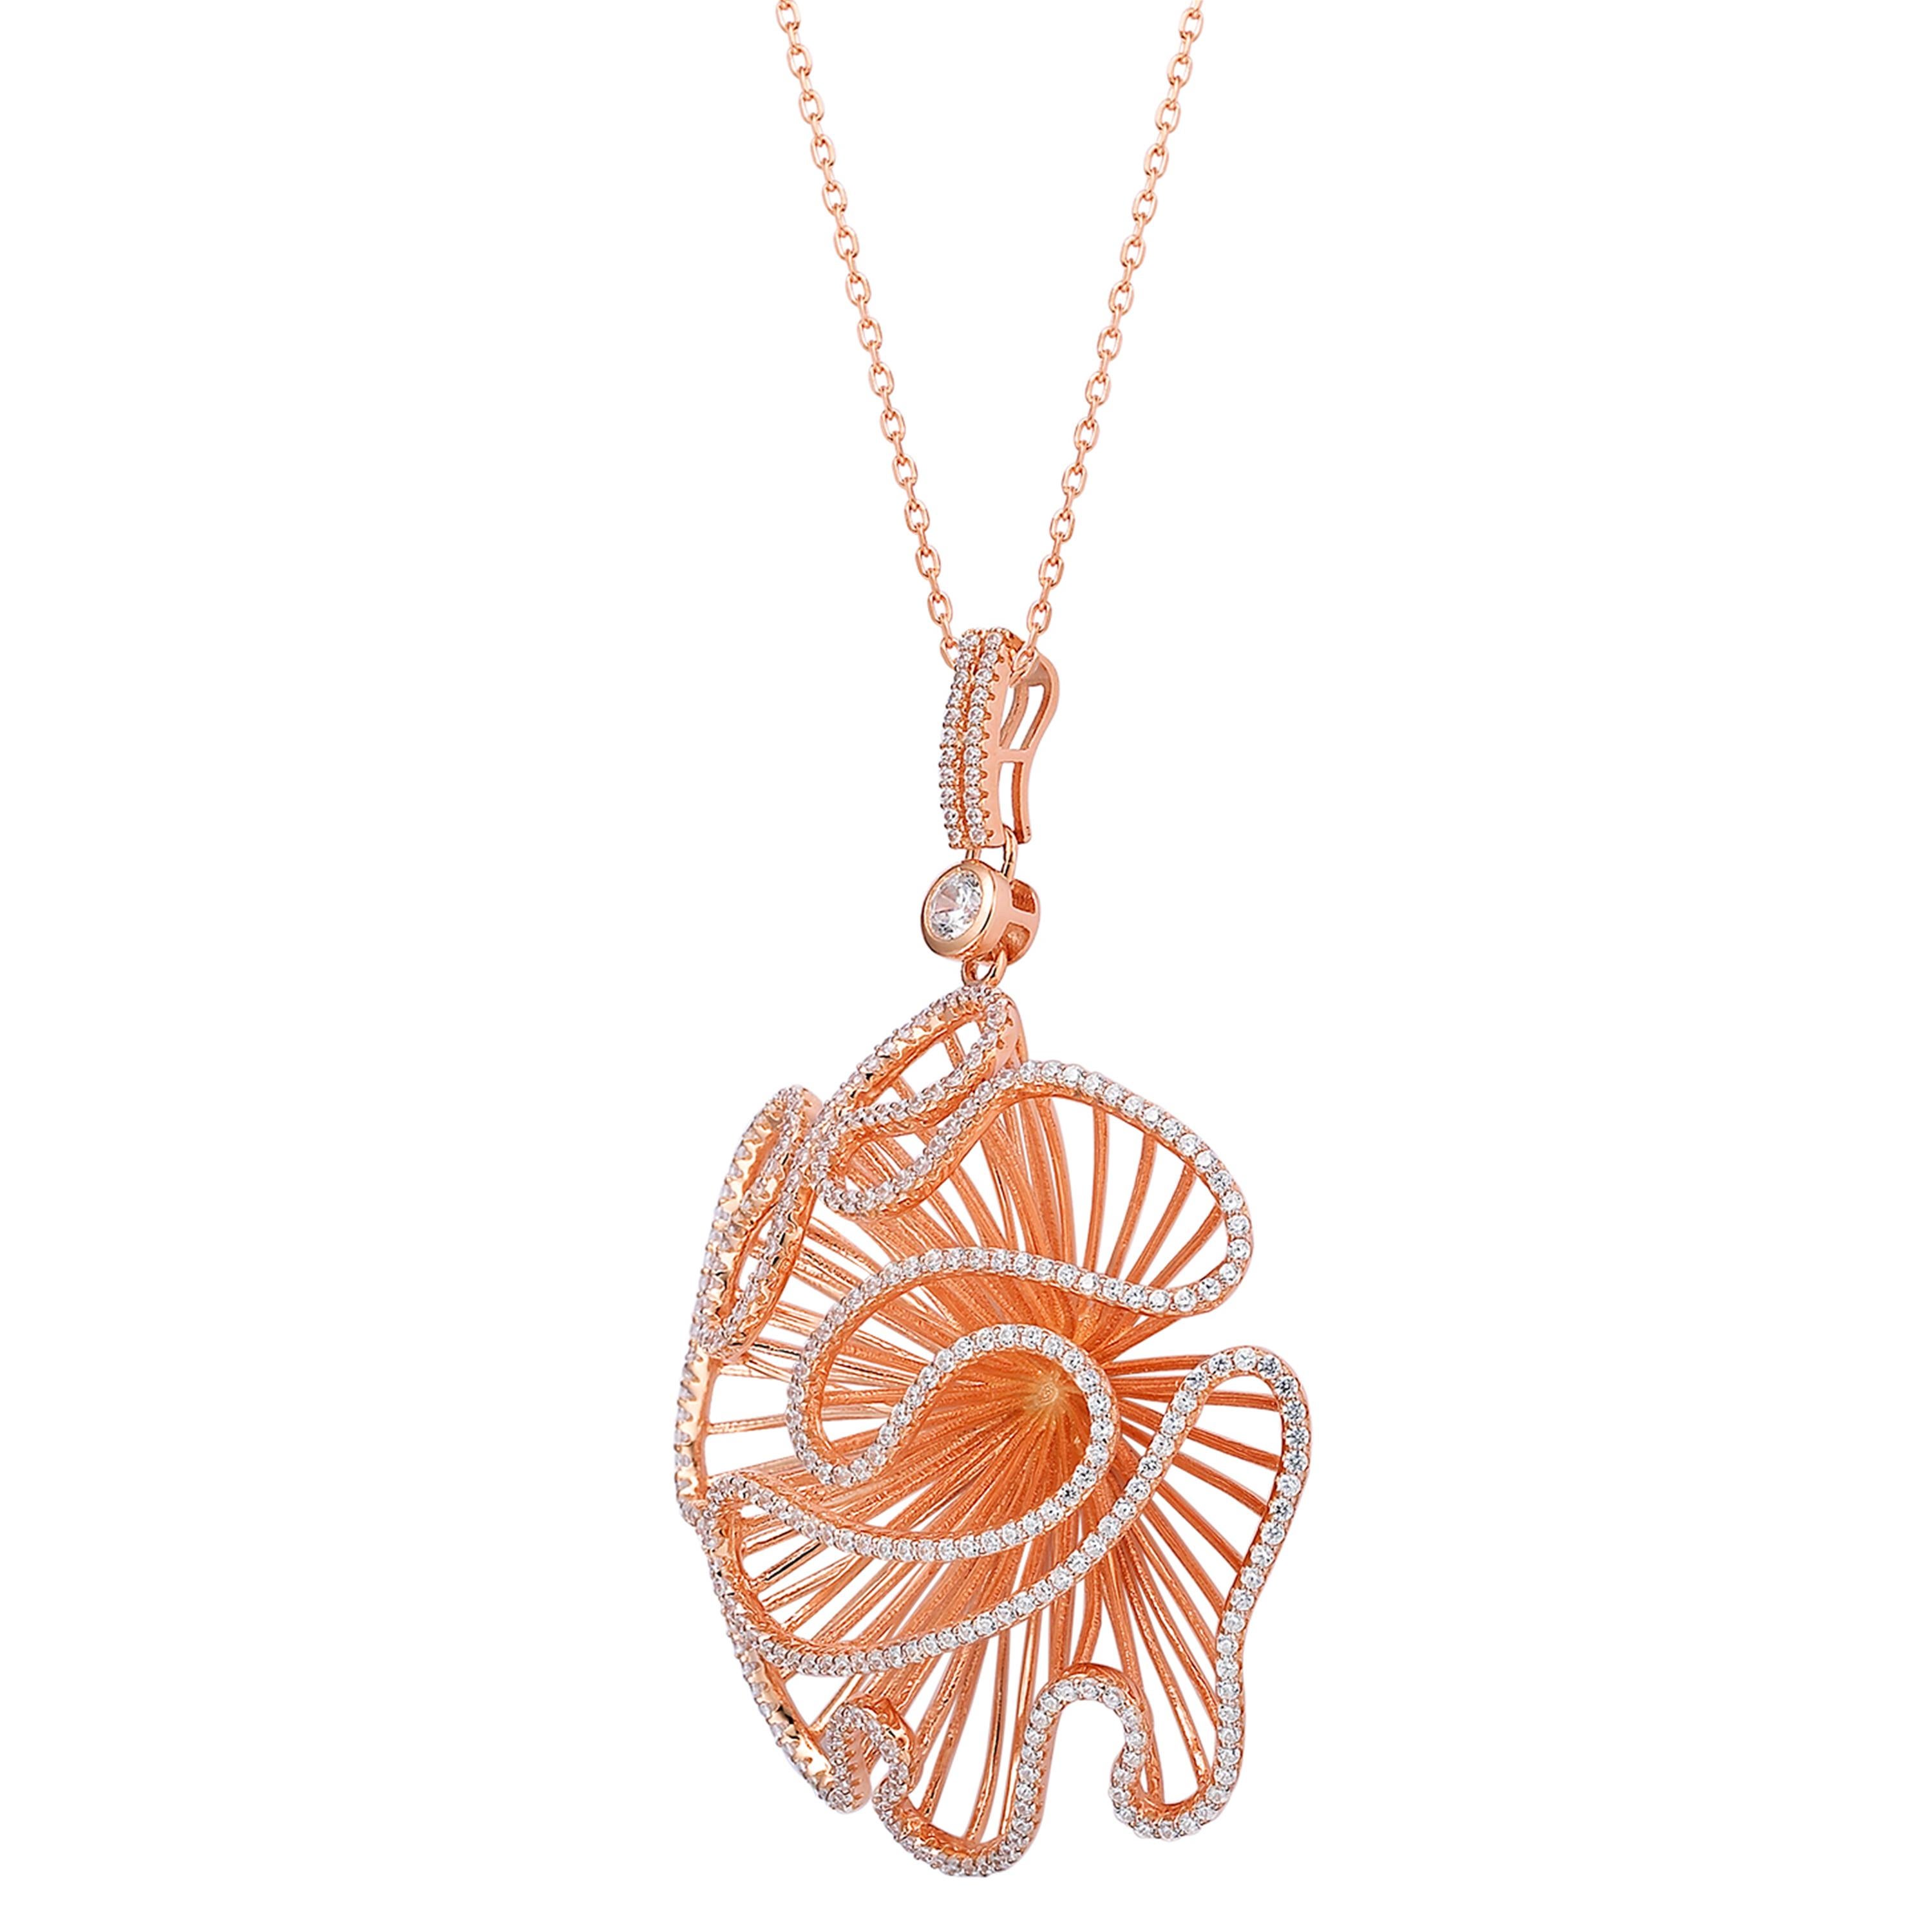 Contemporary Fei Liu CZ Rose Gold Plated Sterling Silver Statement Pendant Necklace